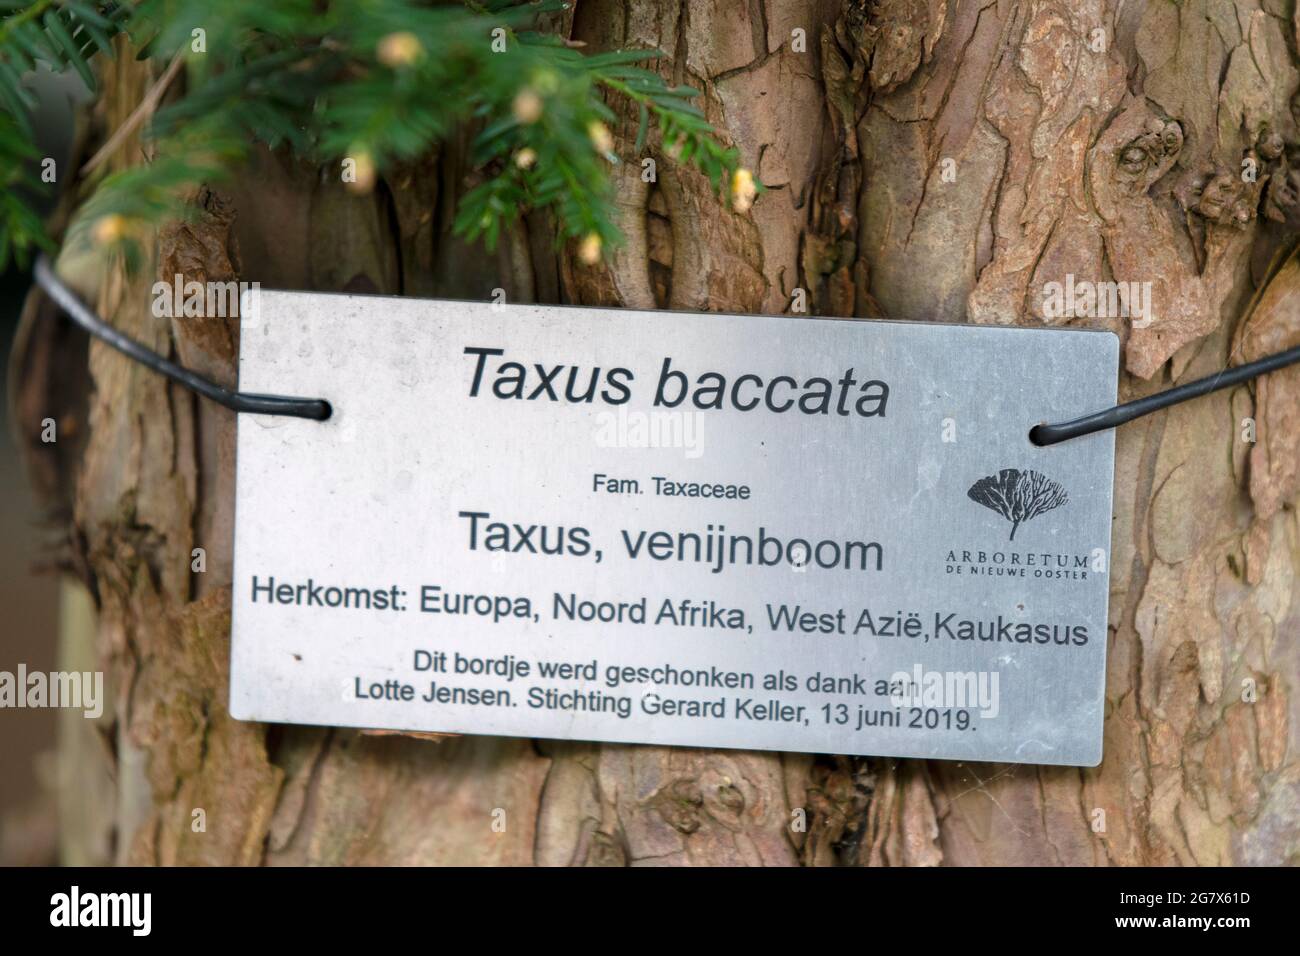 Sign Taxus Baccata Treet At Amsterdam The Netherlands 12-4-2021 Stock Photo